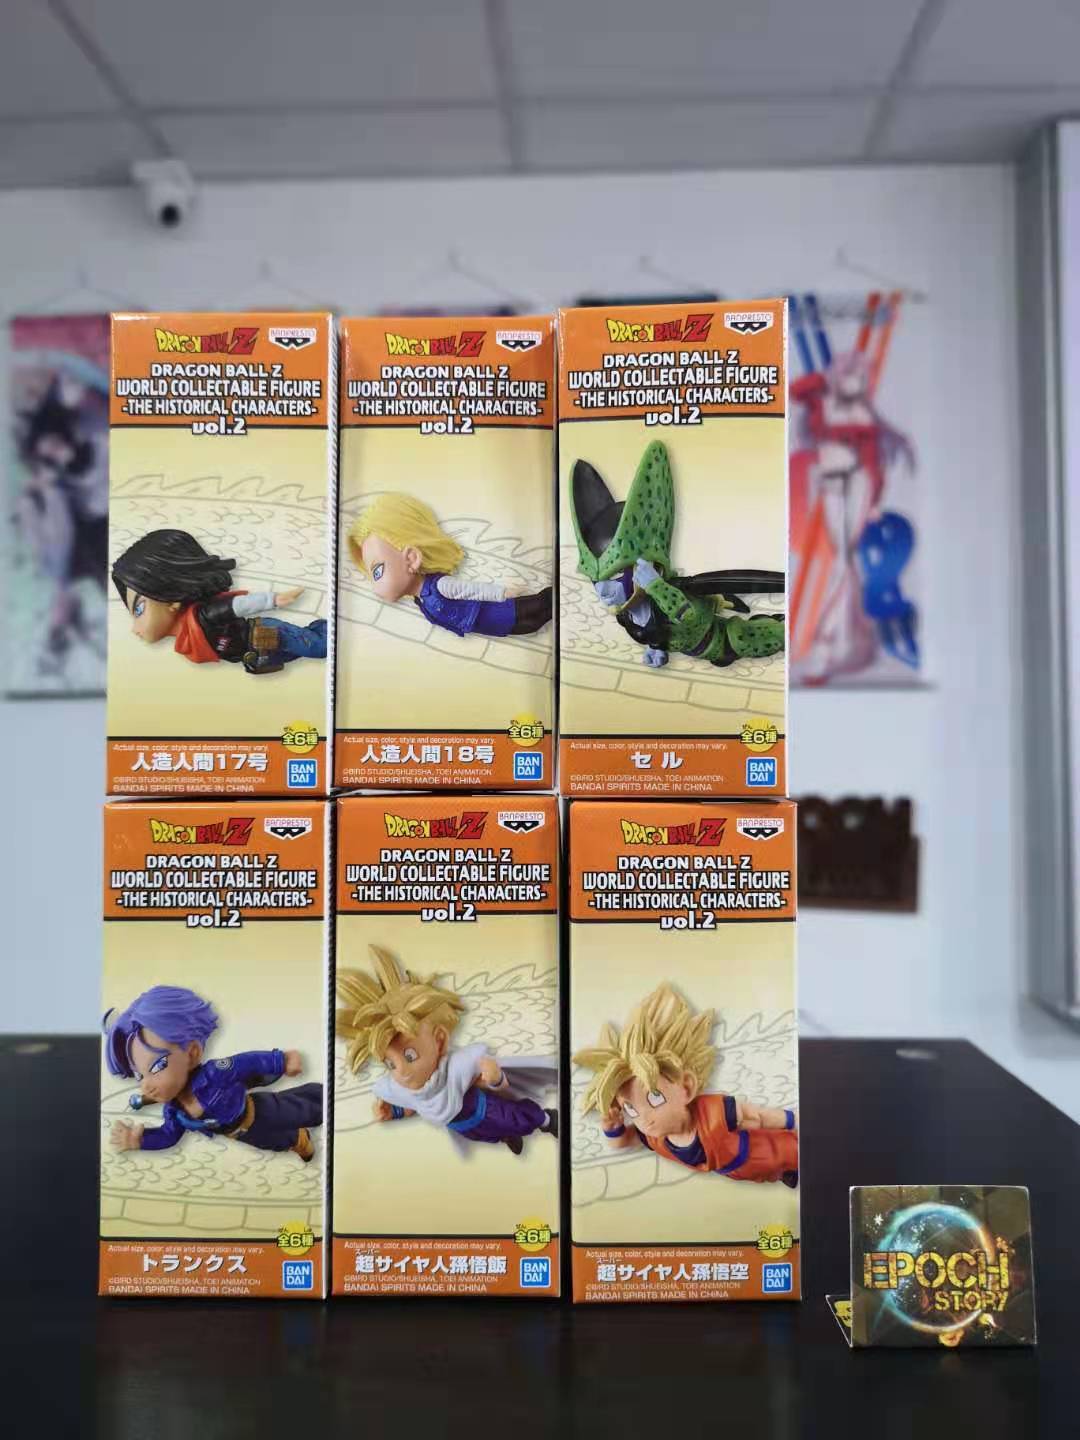 Dragon Ball Z Worold Collectable Figure The Historical Charaters Vol.2.jpg